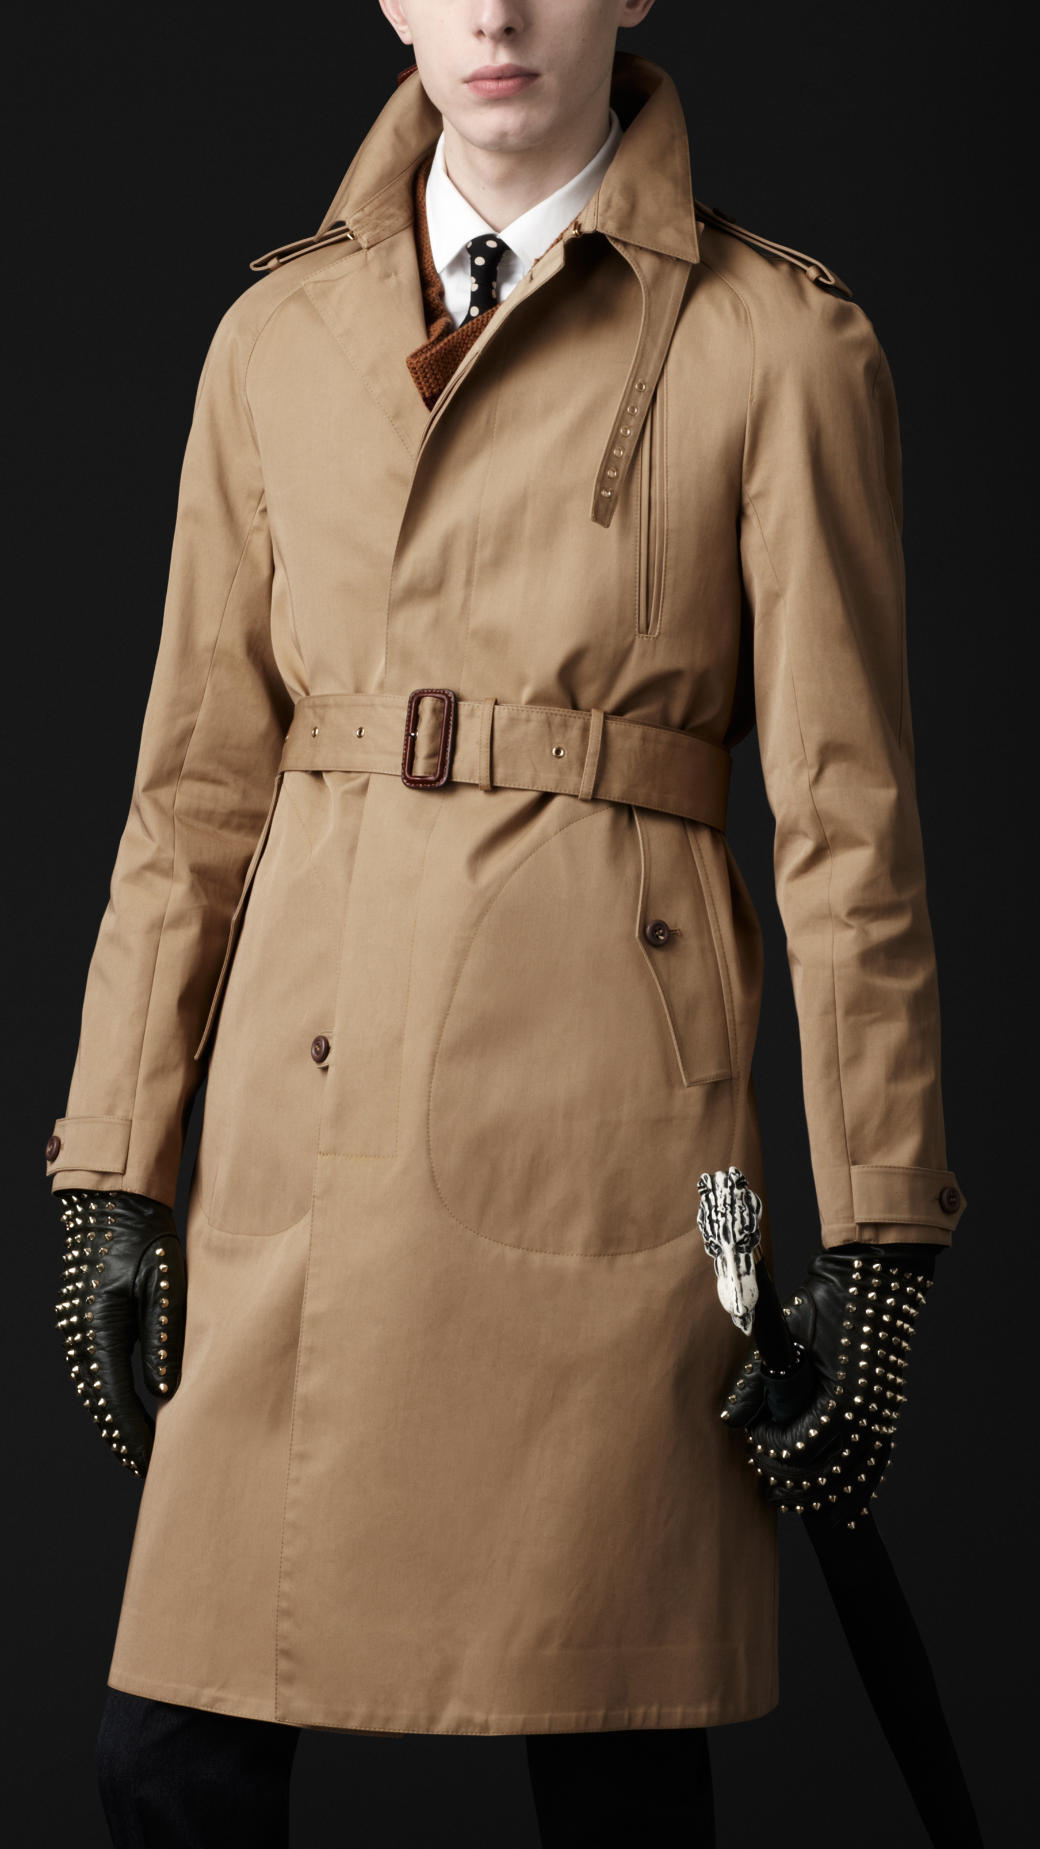 Lyst - Burberry Prorsum Fitted Cotton Trench Coat in Natural for Men